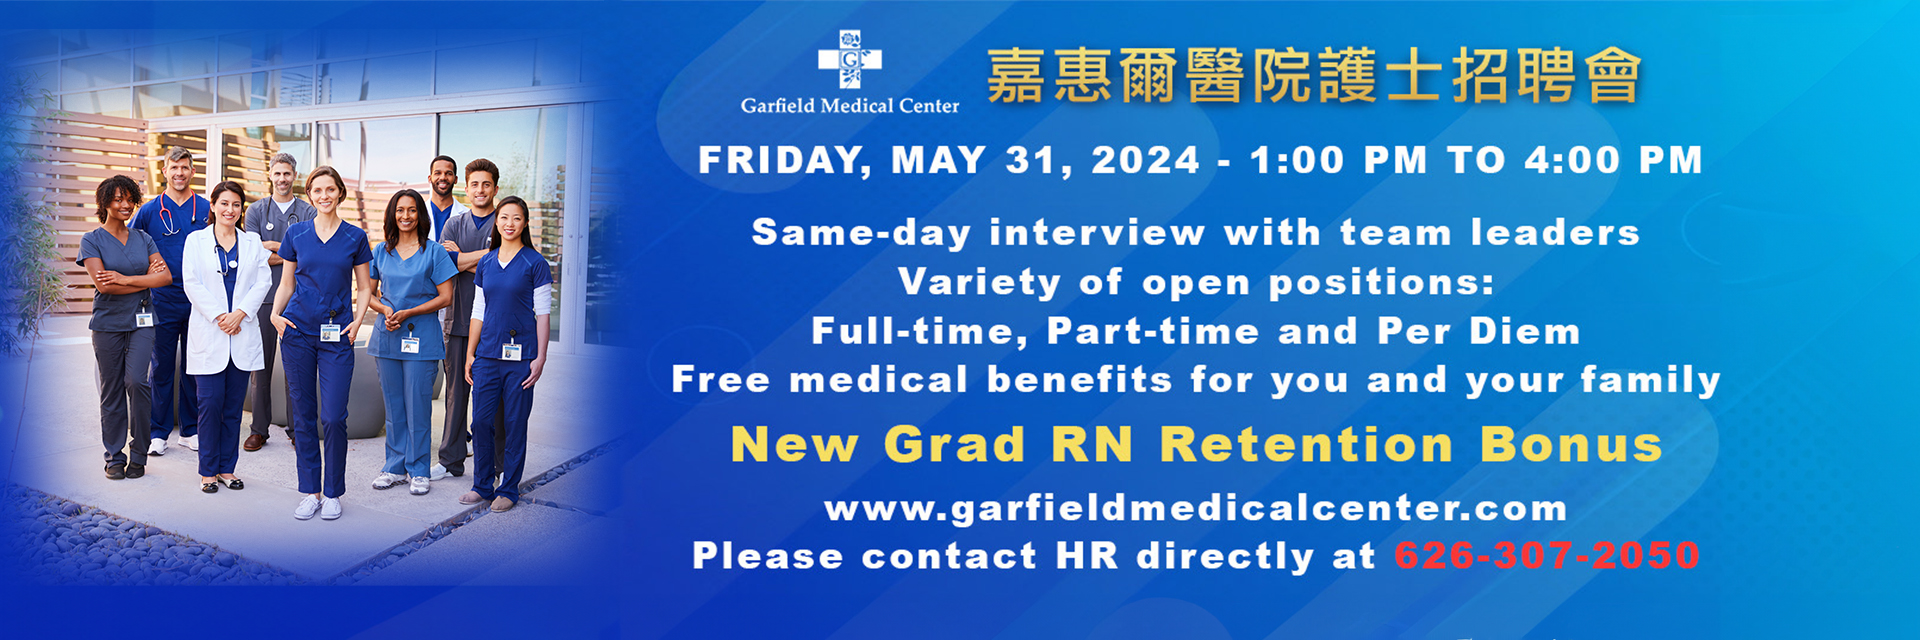 Upcoming Career Fair at Garfield Medical Center to be held on Friday May 31, from 1:00 PM to 4:00 PM.

Same-day interview with team leaders 
Variety of open positions
Full-Time, Part-Time, and Per Diem
Free Medical benefits for you and your family

New Grad RN Retention Bonus

www.garfieldmedicalcenter.com
Please contact HR directly at 626-307-2050